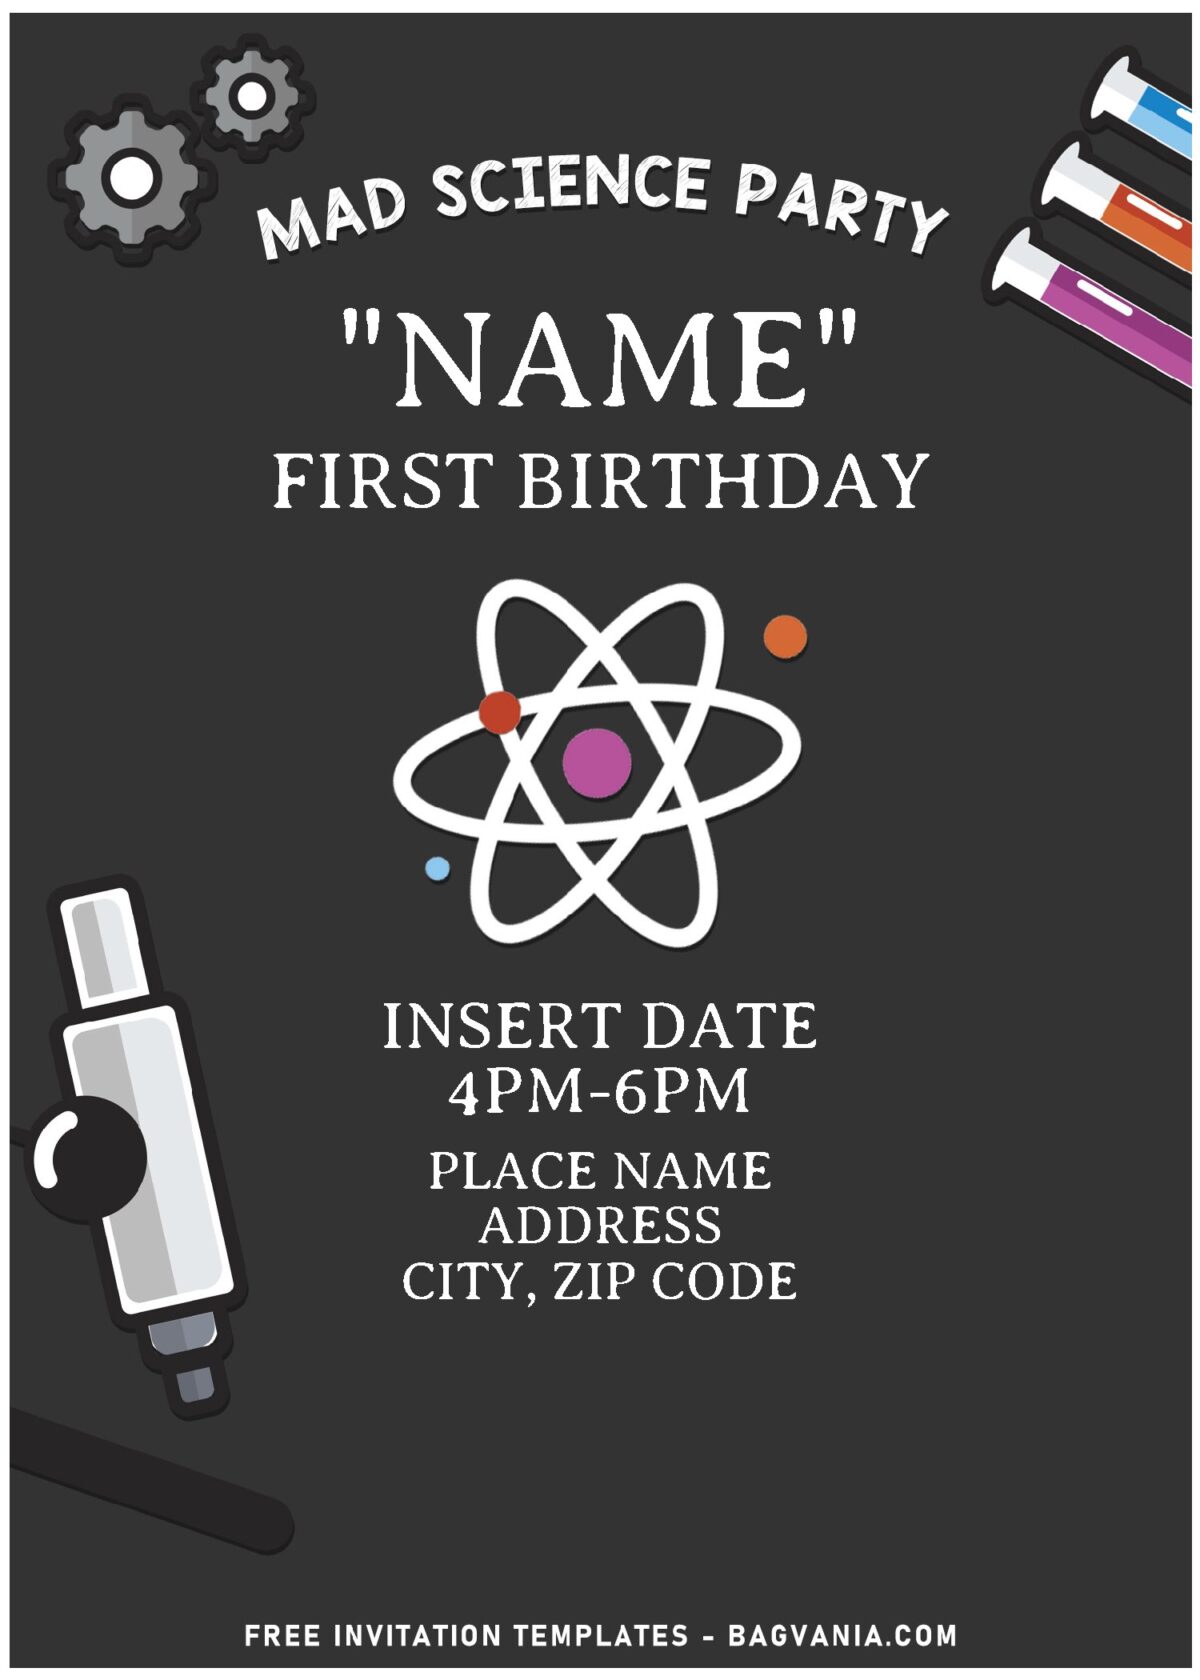 (Free Editable PDF) Fabulous Mad Scientist Birthday Party Invitation Templates with cute wordings